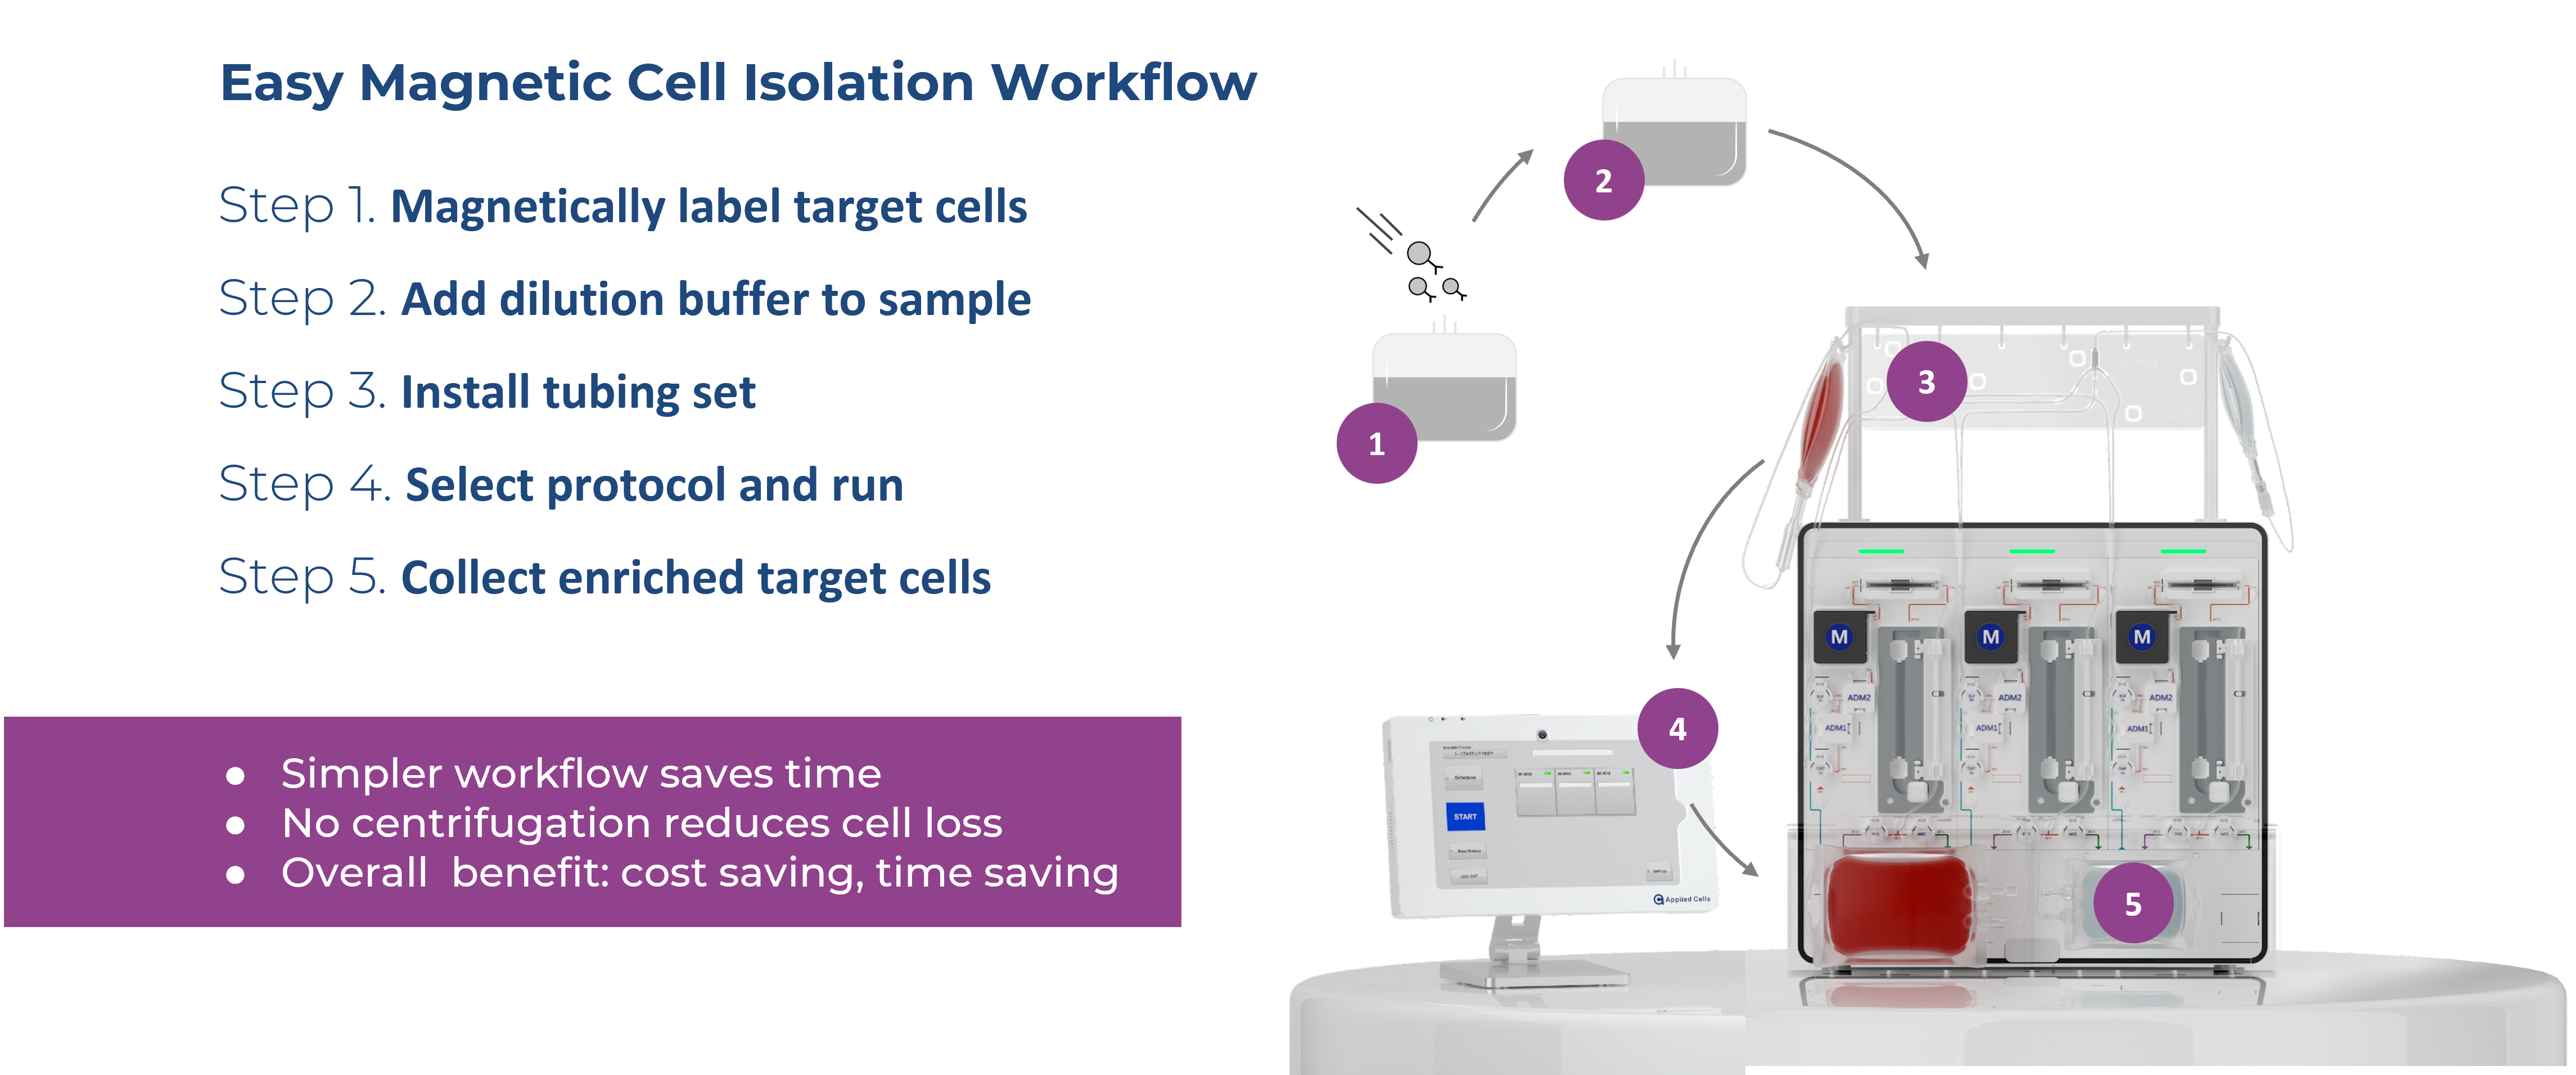 Isolating T cells for CART cell therapy directly from whole blood, with MARS Bar platform, offers efficiency, co-effectiveness and saves time.